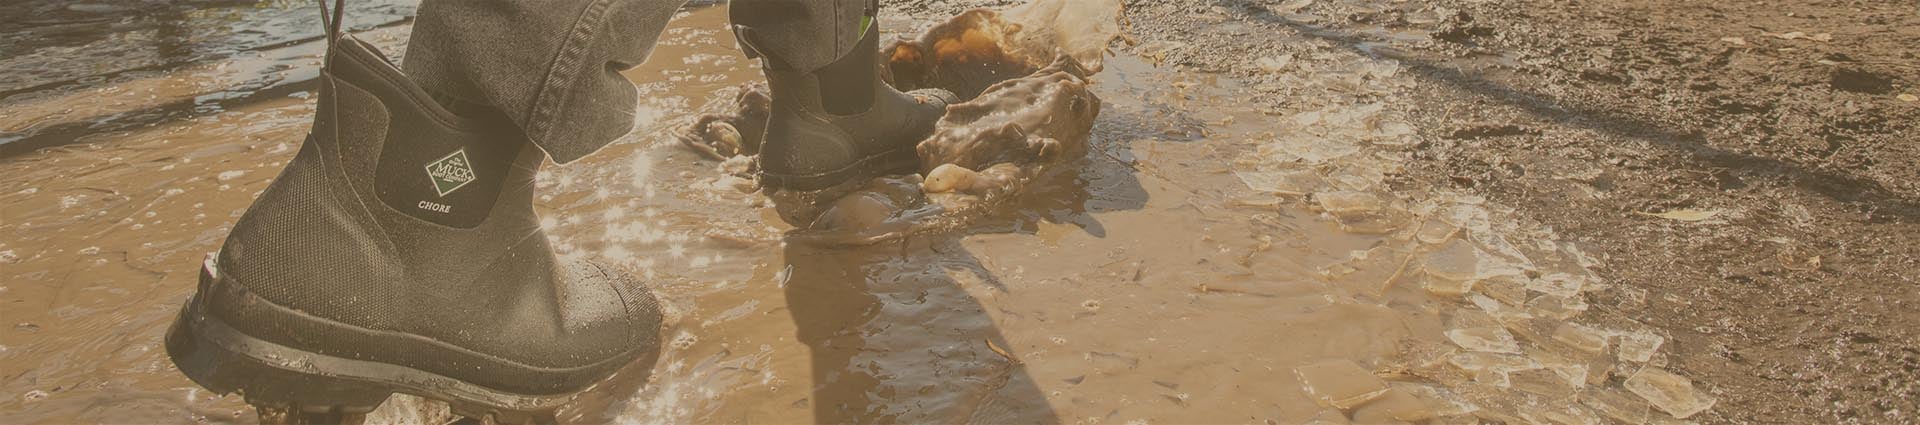 muck boot company chore boots